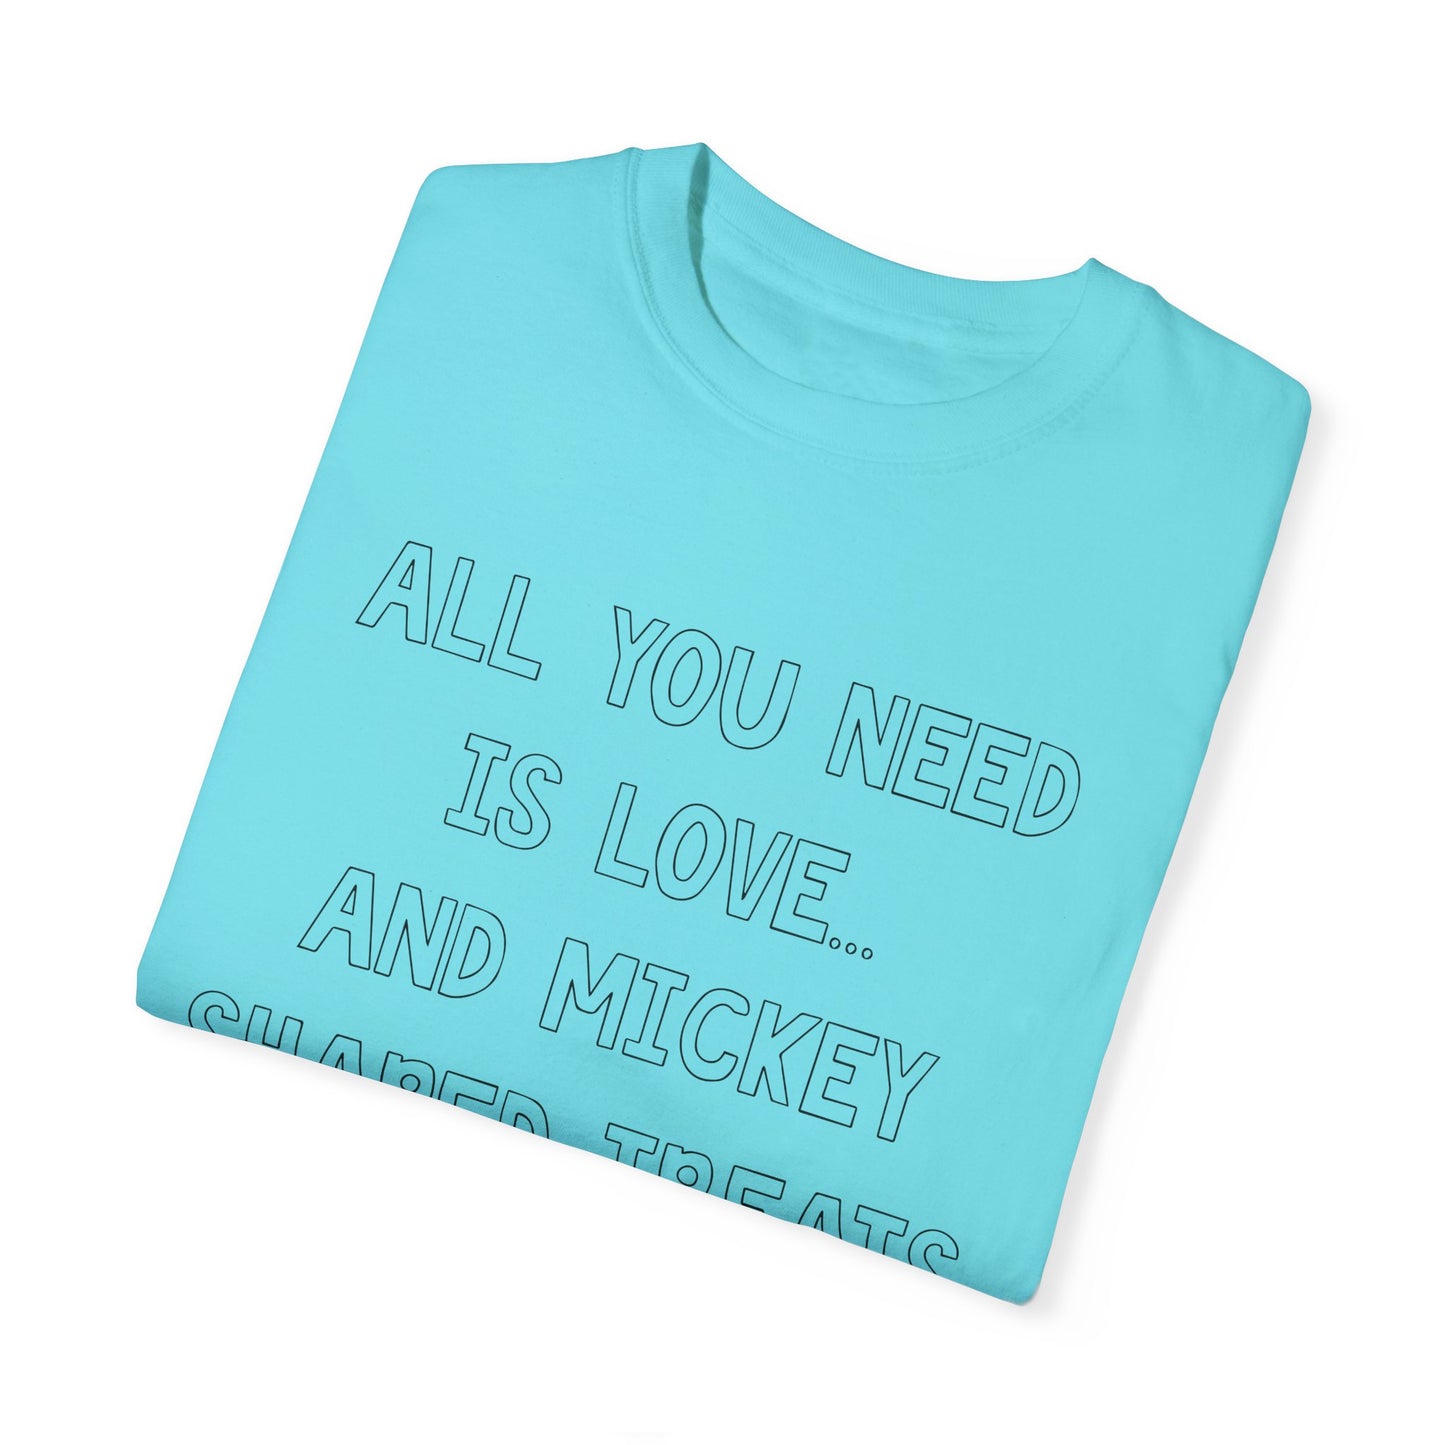 Adult All you need is love Tee